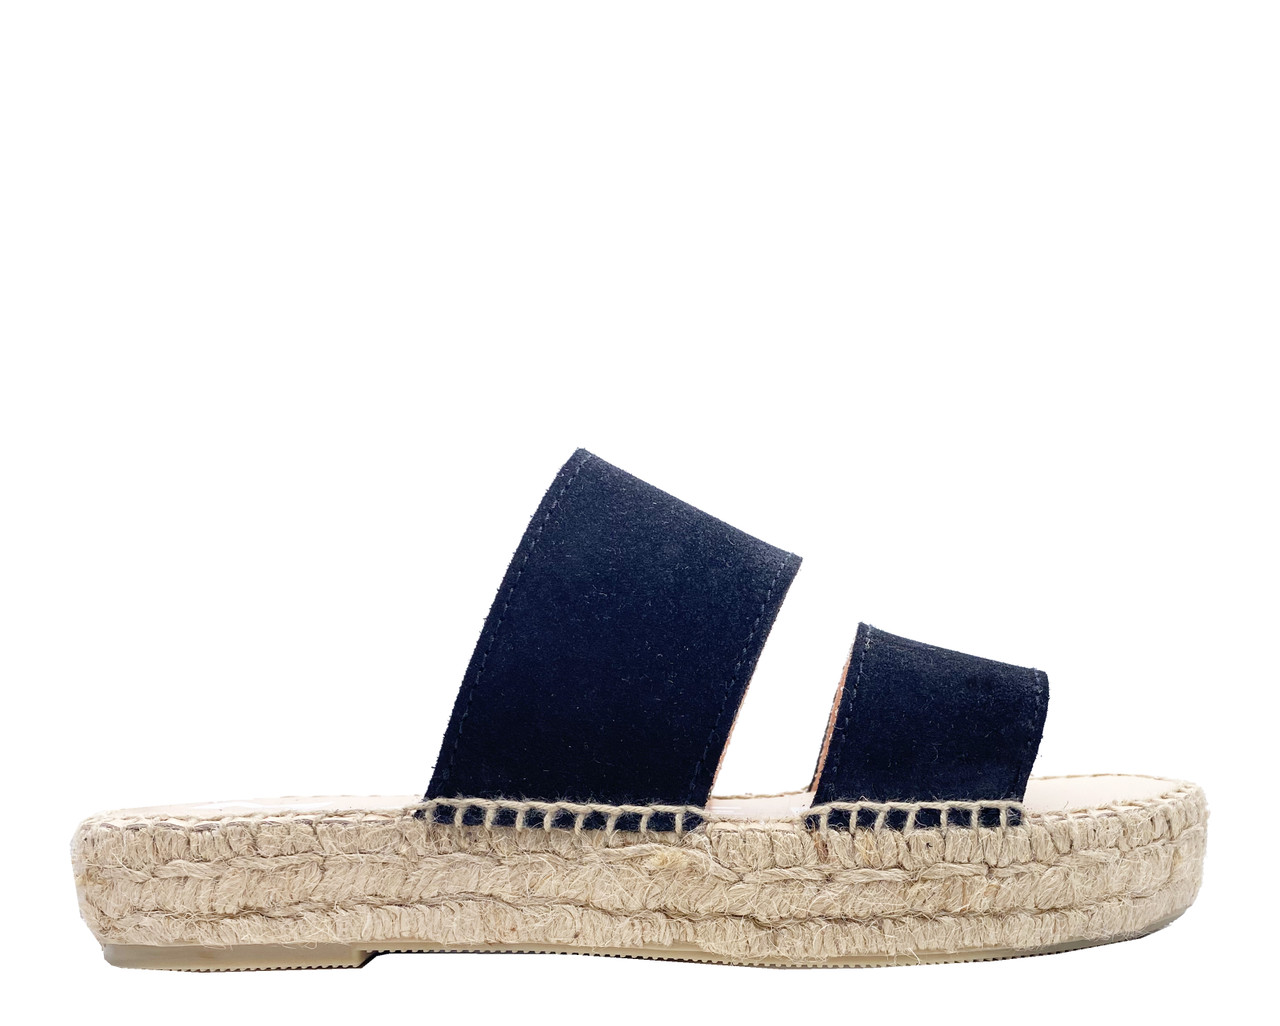 SASOM | shoes Balenciaga Women's Pool Clog Slide Sandals In Rubber Sole  Beige (W) Check the latest price now!